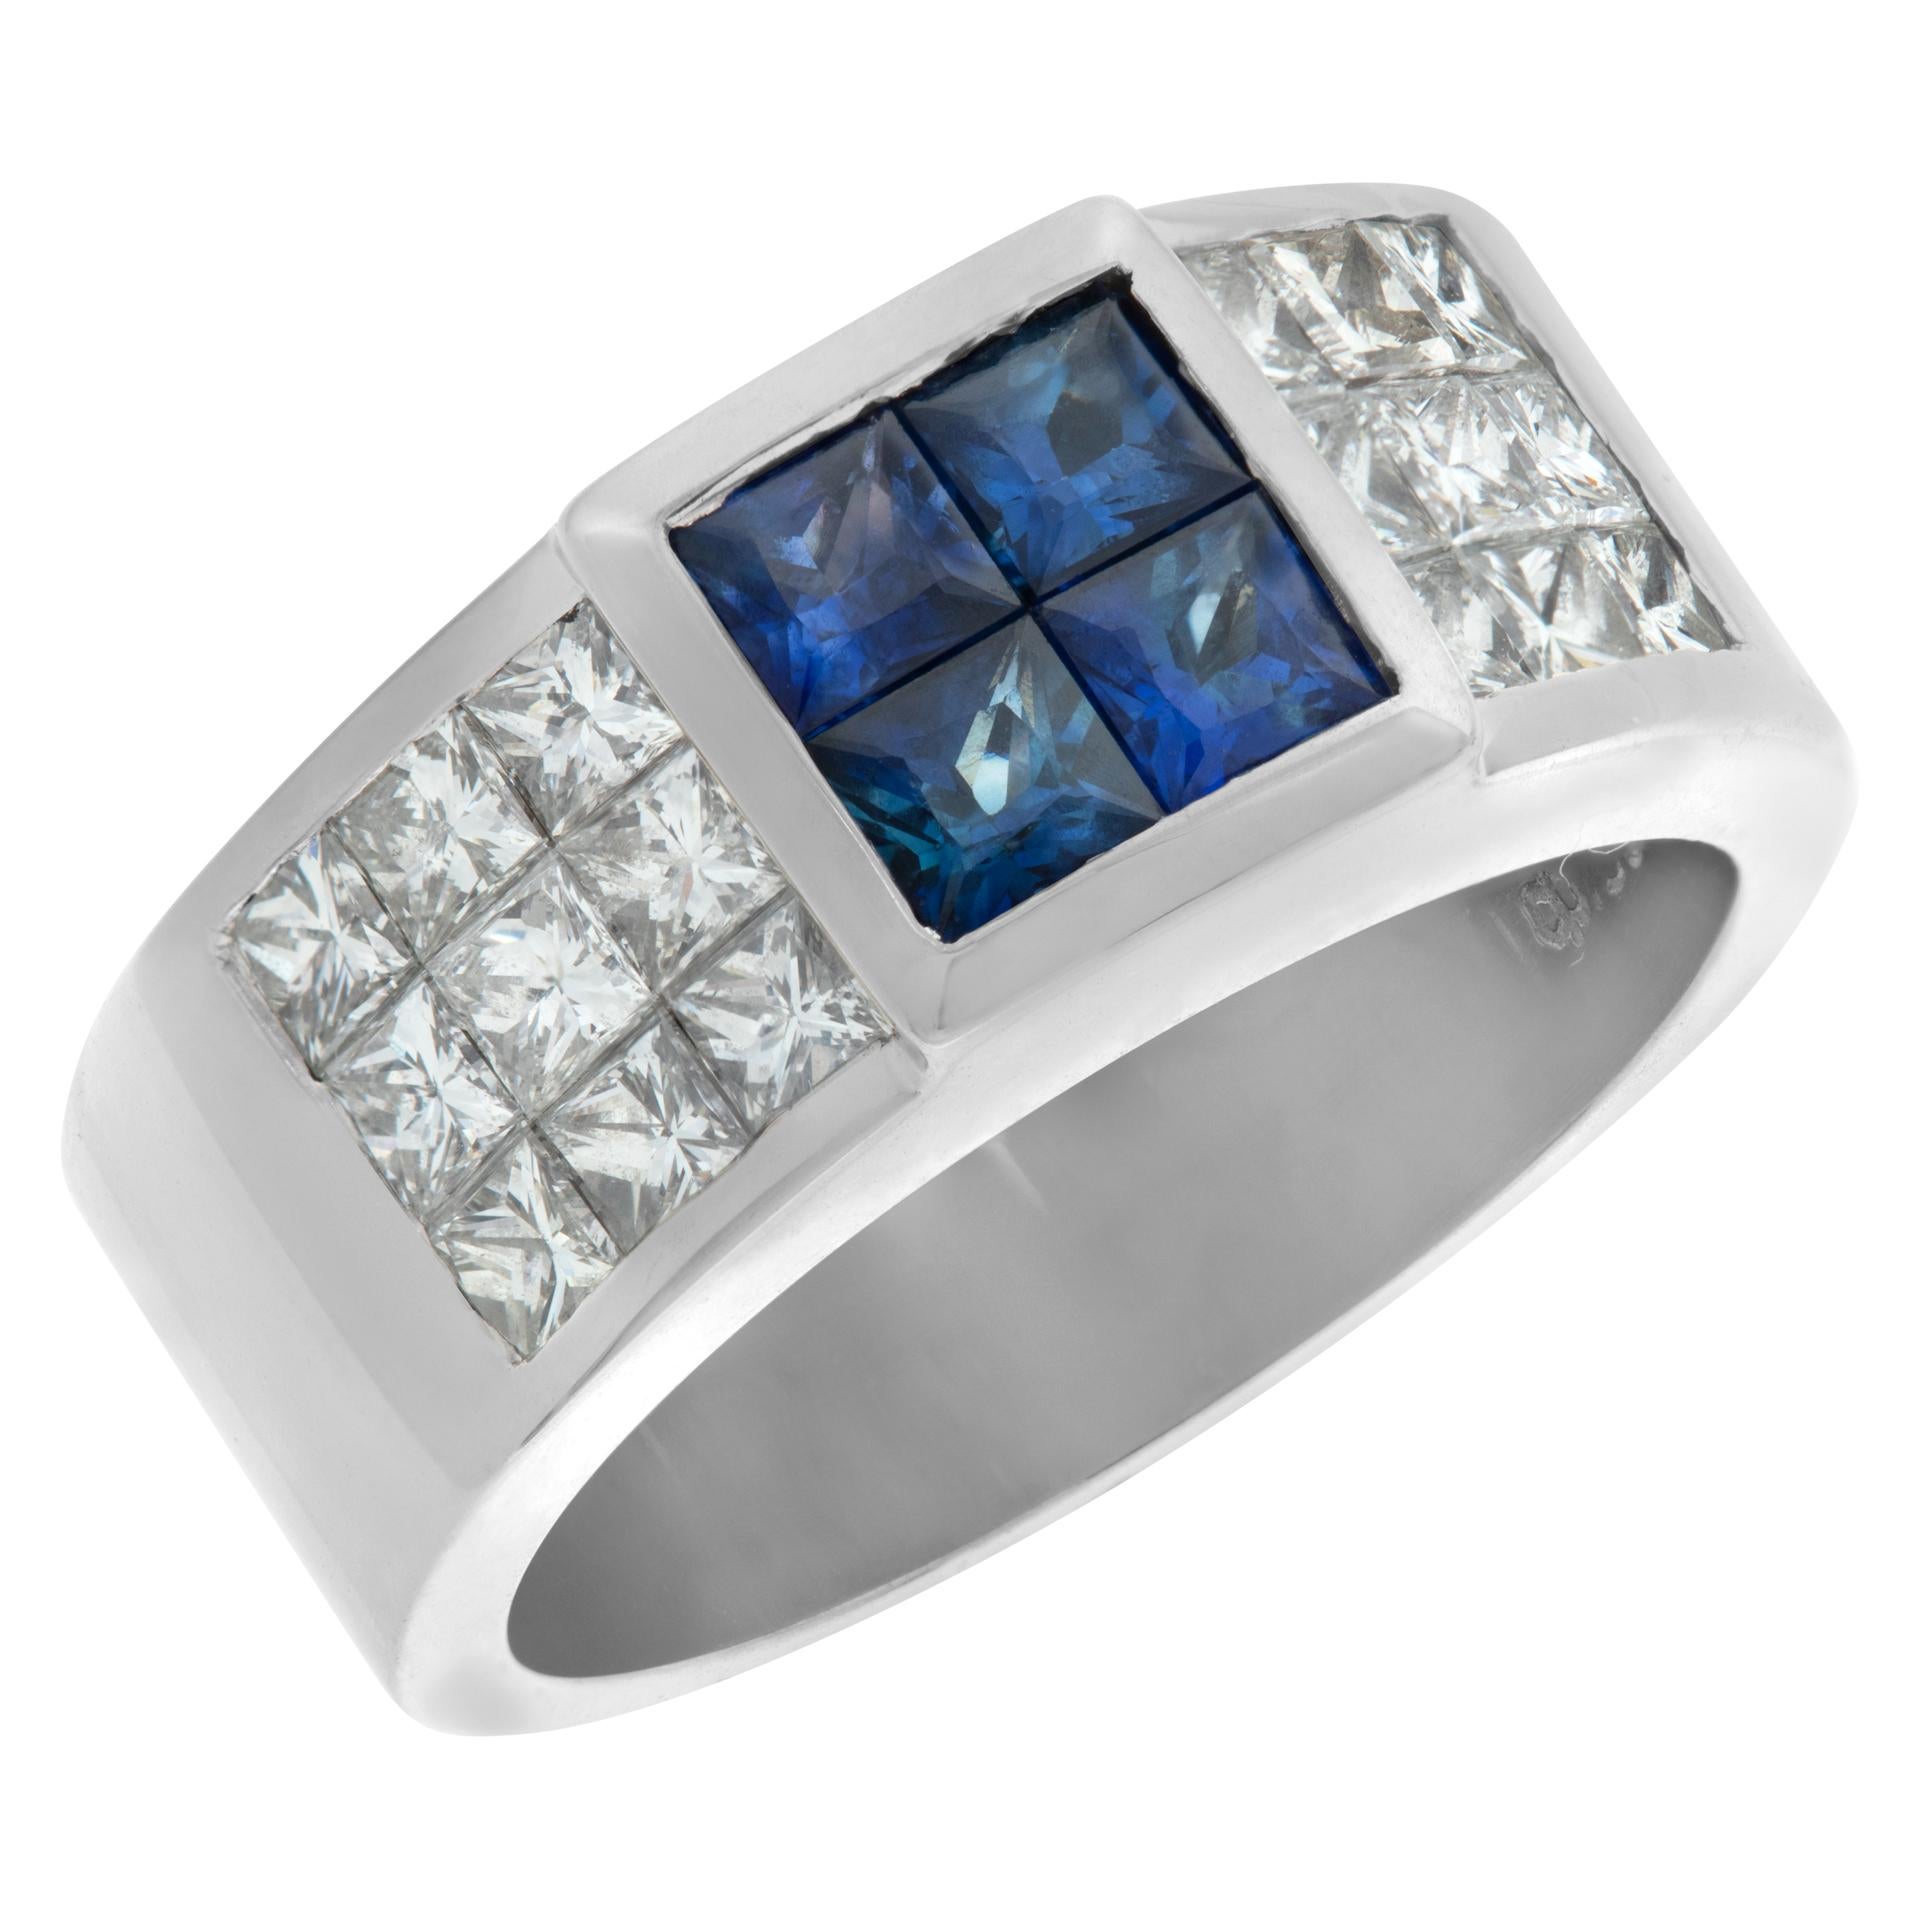 Princess Cut Diamond & Sapphire Ring in 18k White Gold In Excellent Condition For Sale In Surfside, FL